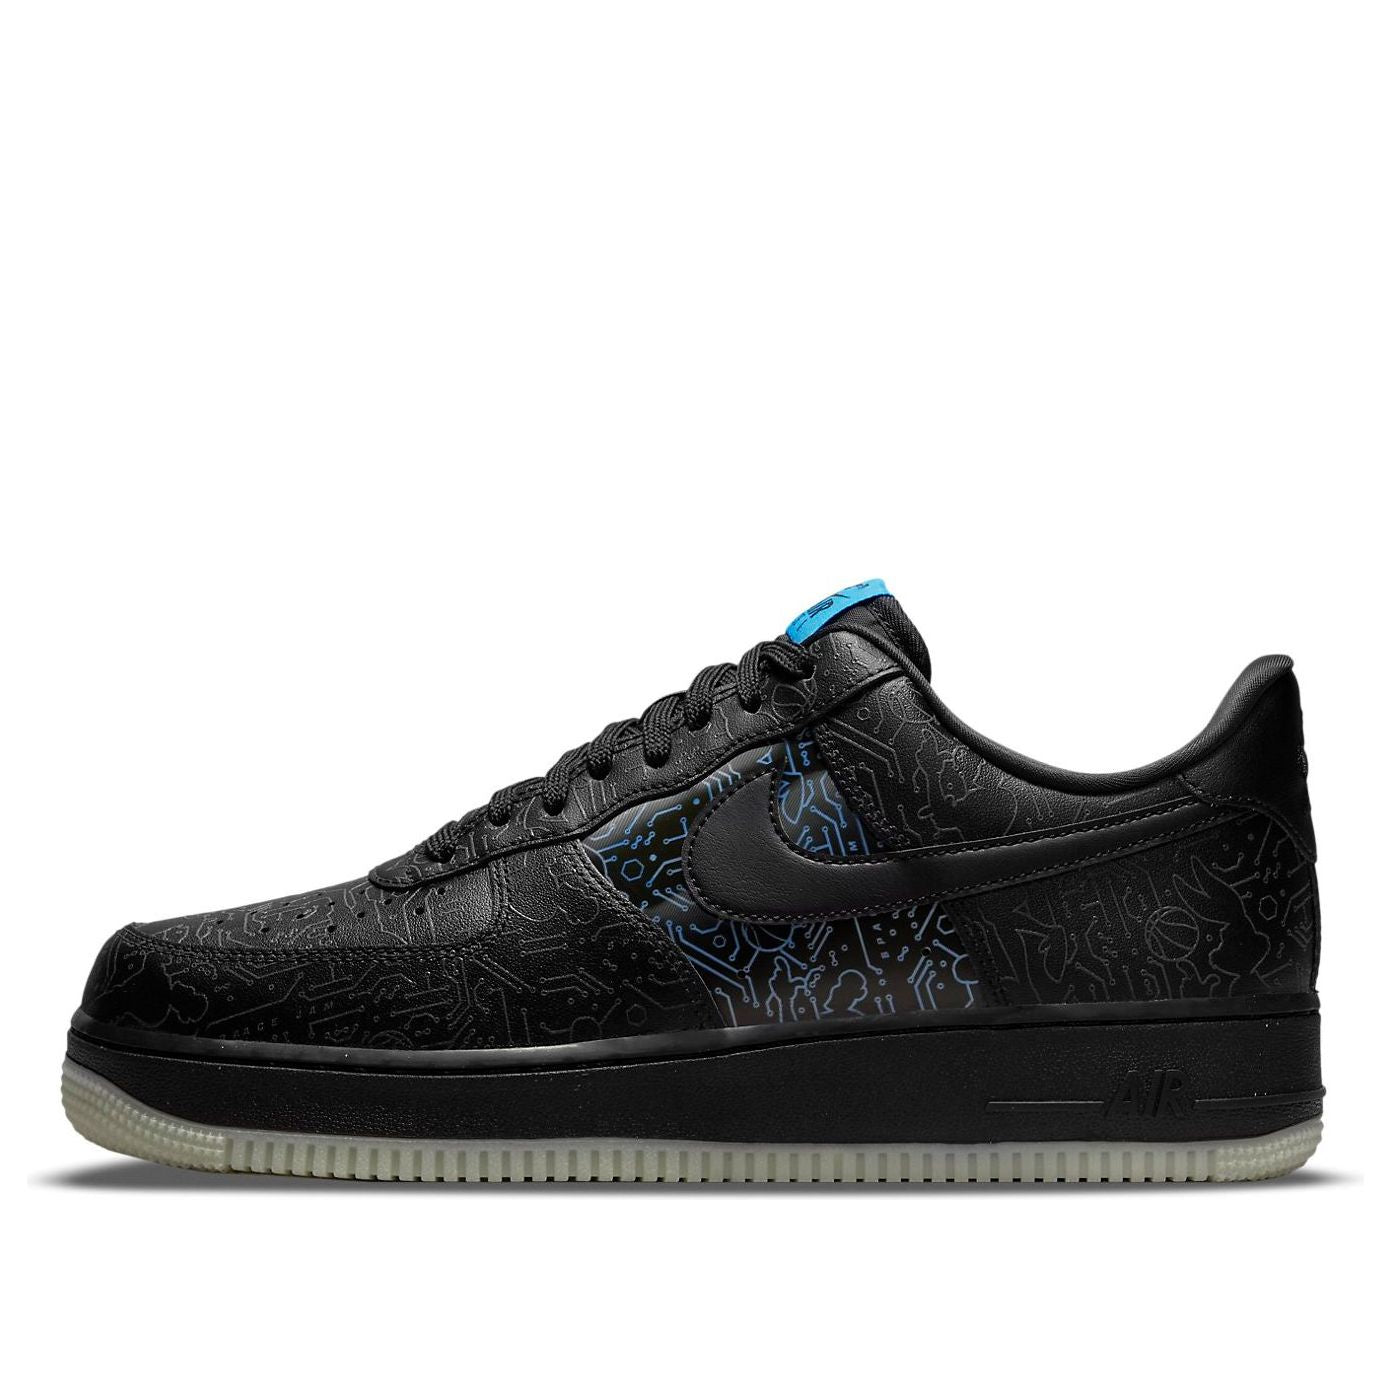 Nike Space Jam x Air Force 1 '07 'Computer Chip' DH5354-001